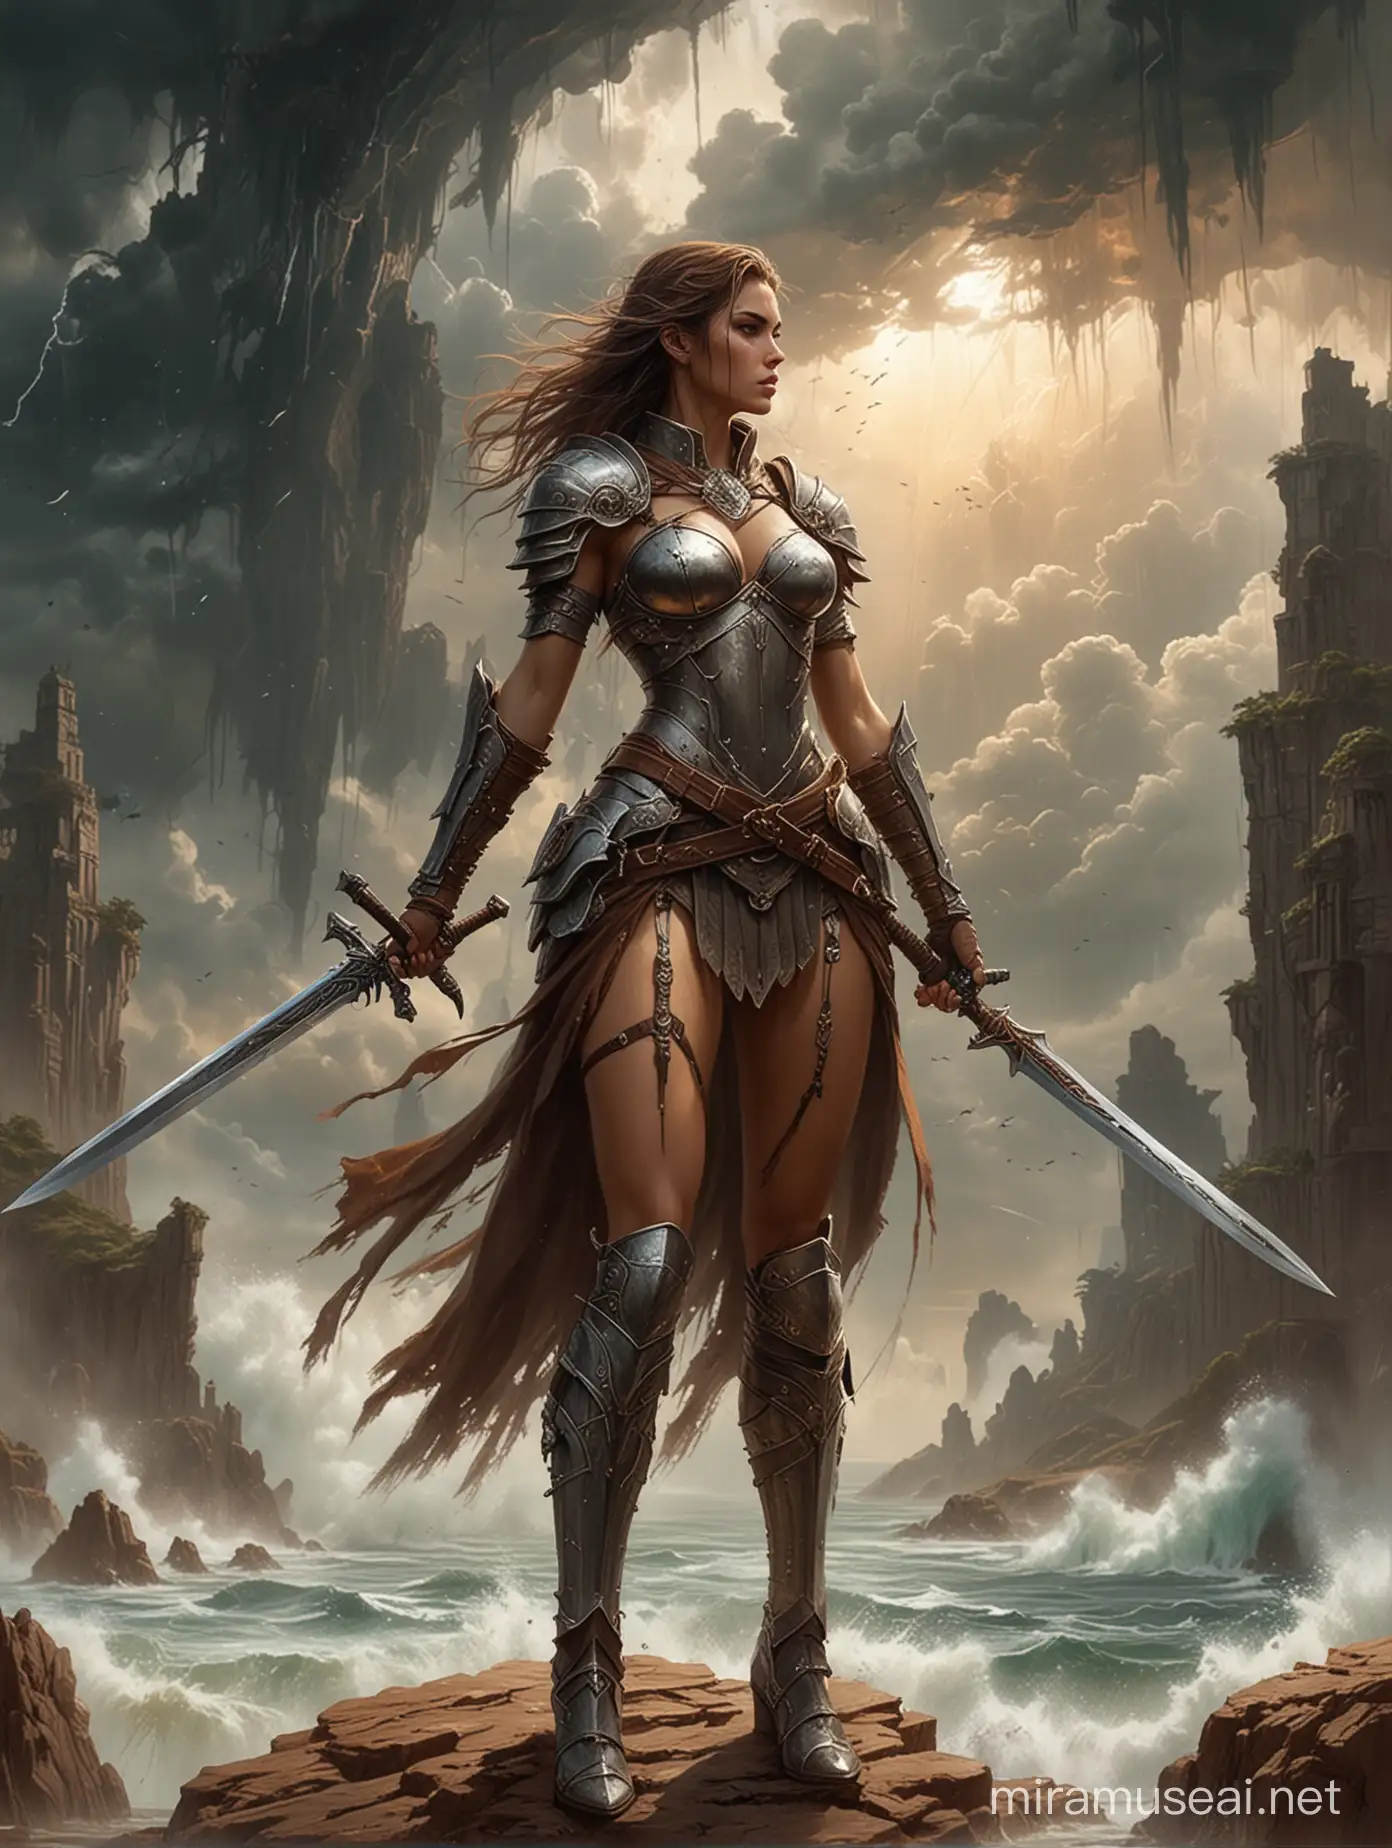 Mighty Female Warrior in Stormy Fantasy Landscape with Sword